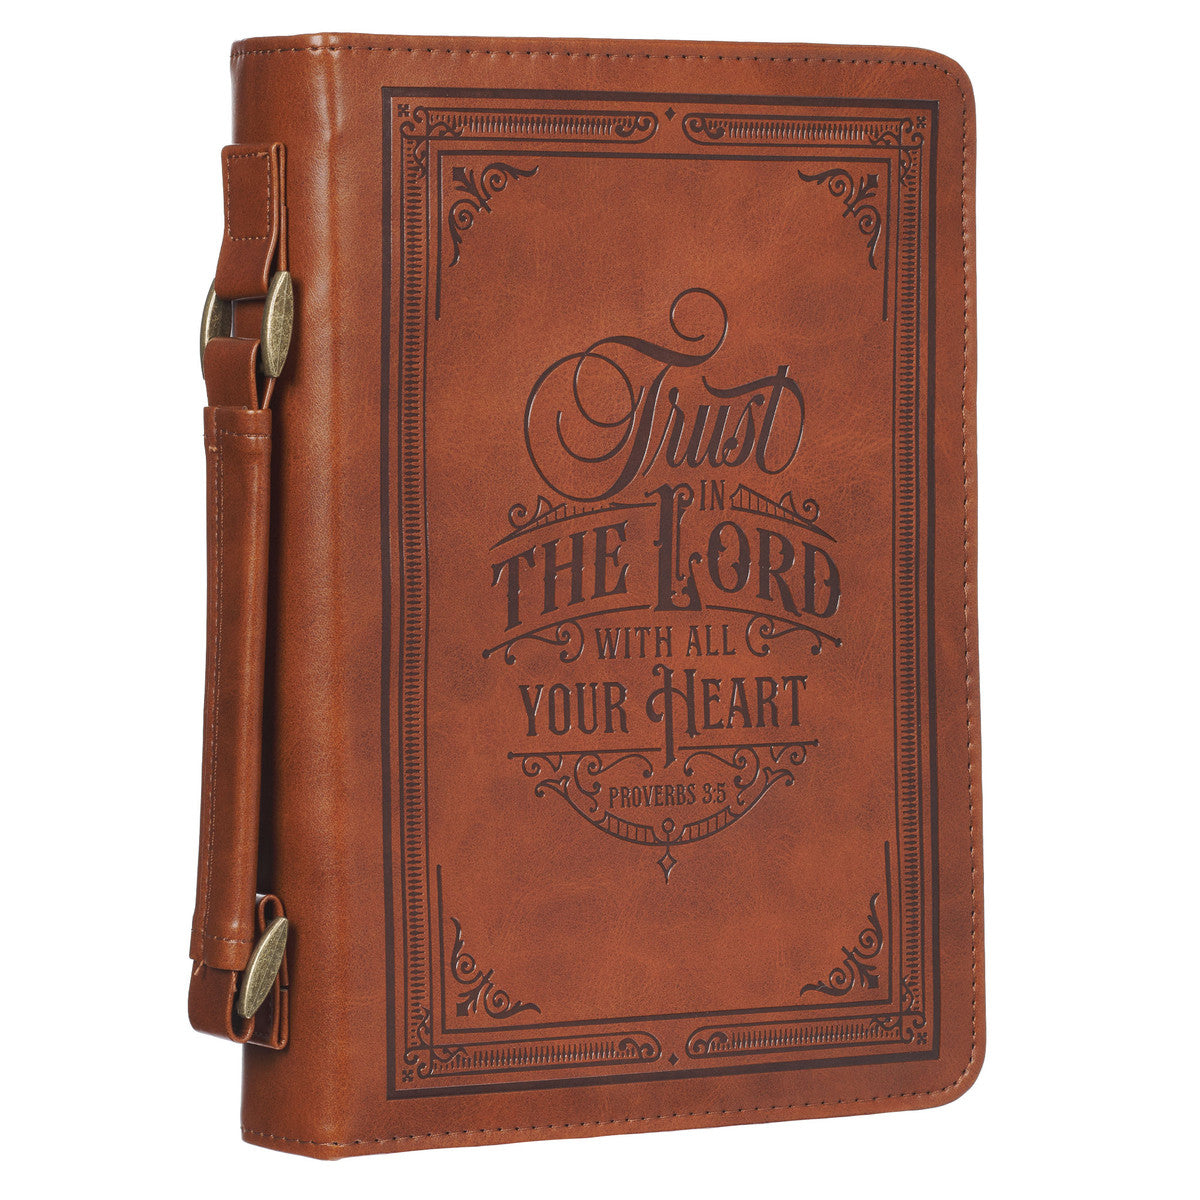 Trust in the Lord Honey-brown Faux Leather Classic Bible Cover - Proverbs 3:5